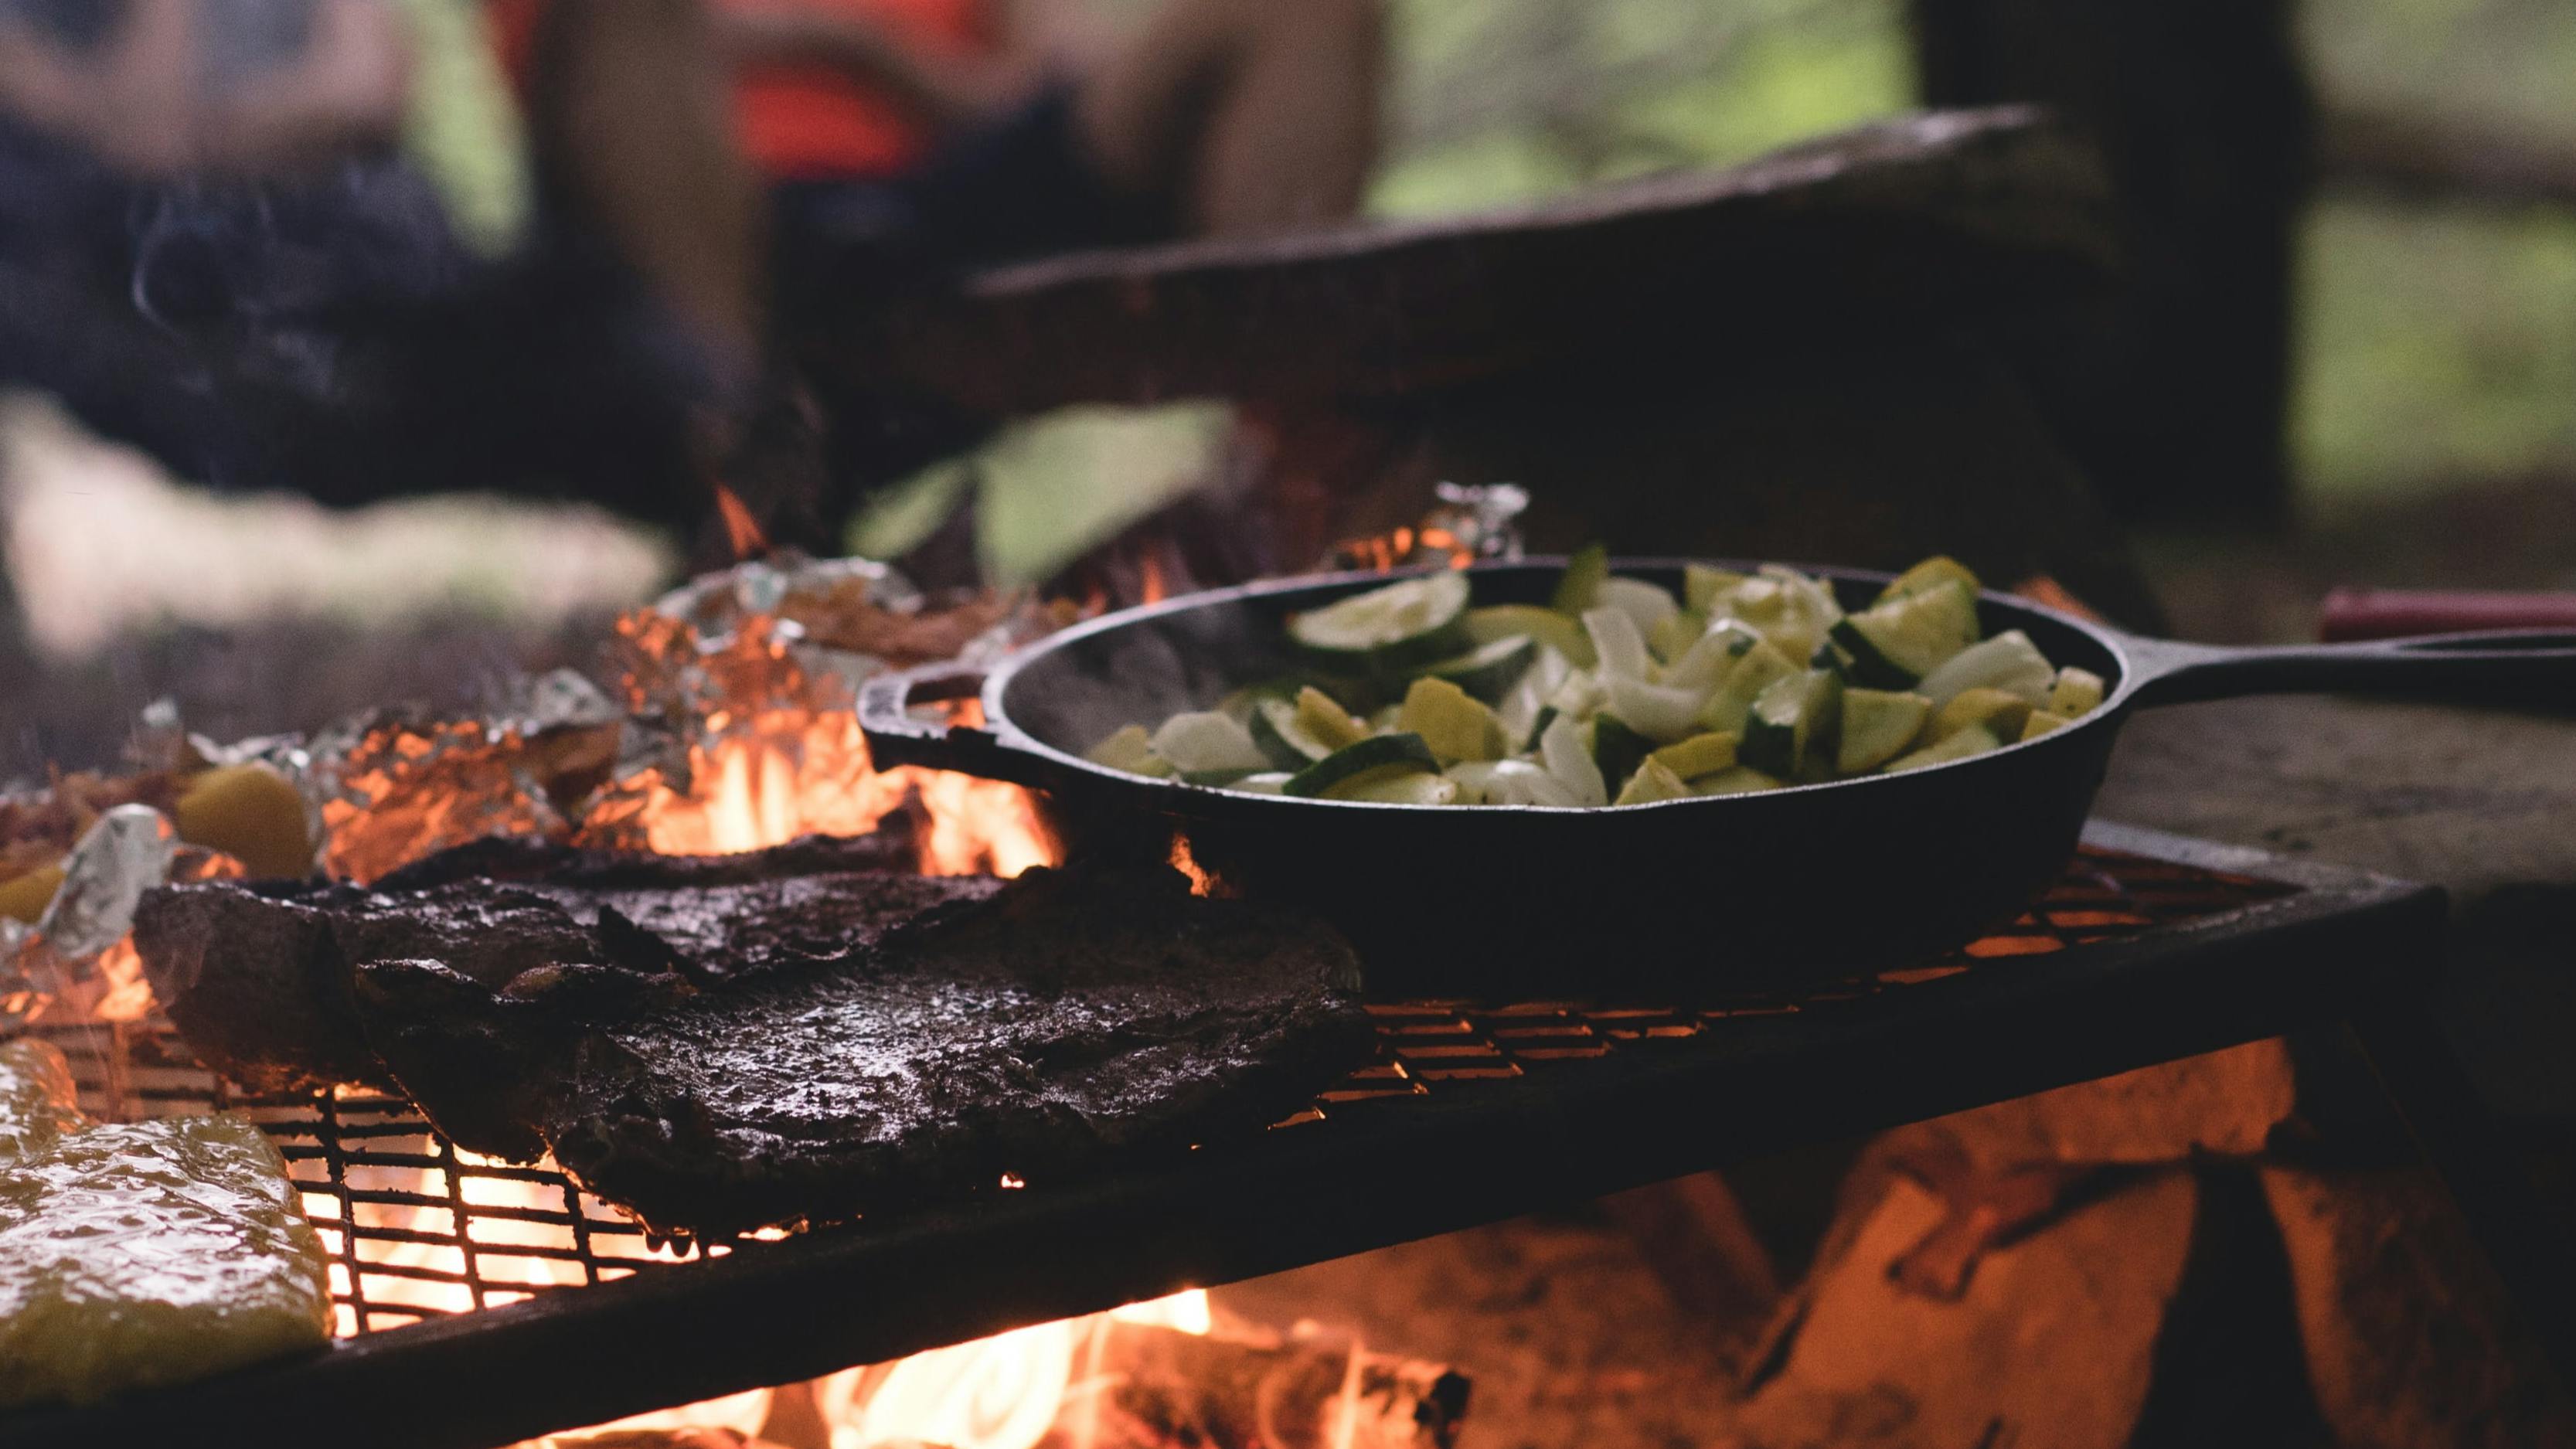 One pan with vegetables in it over a grate on a campfire. There are also some meats on the grate. 